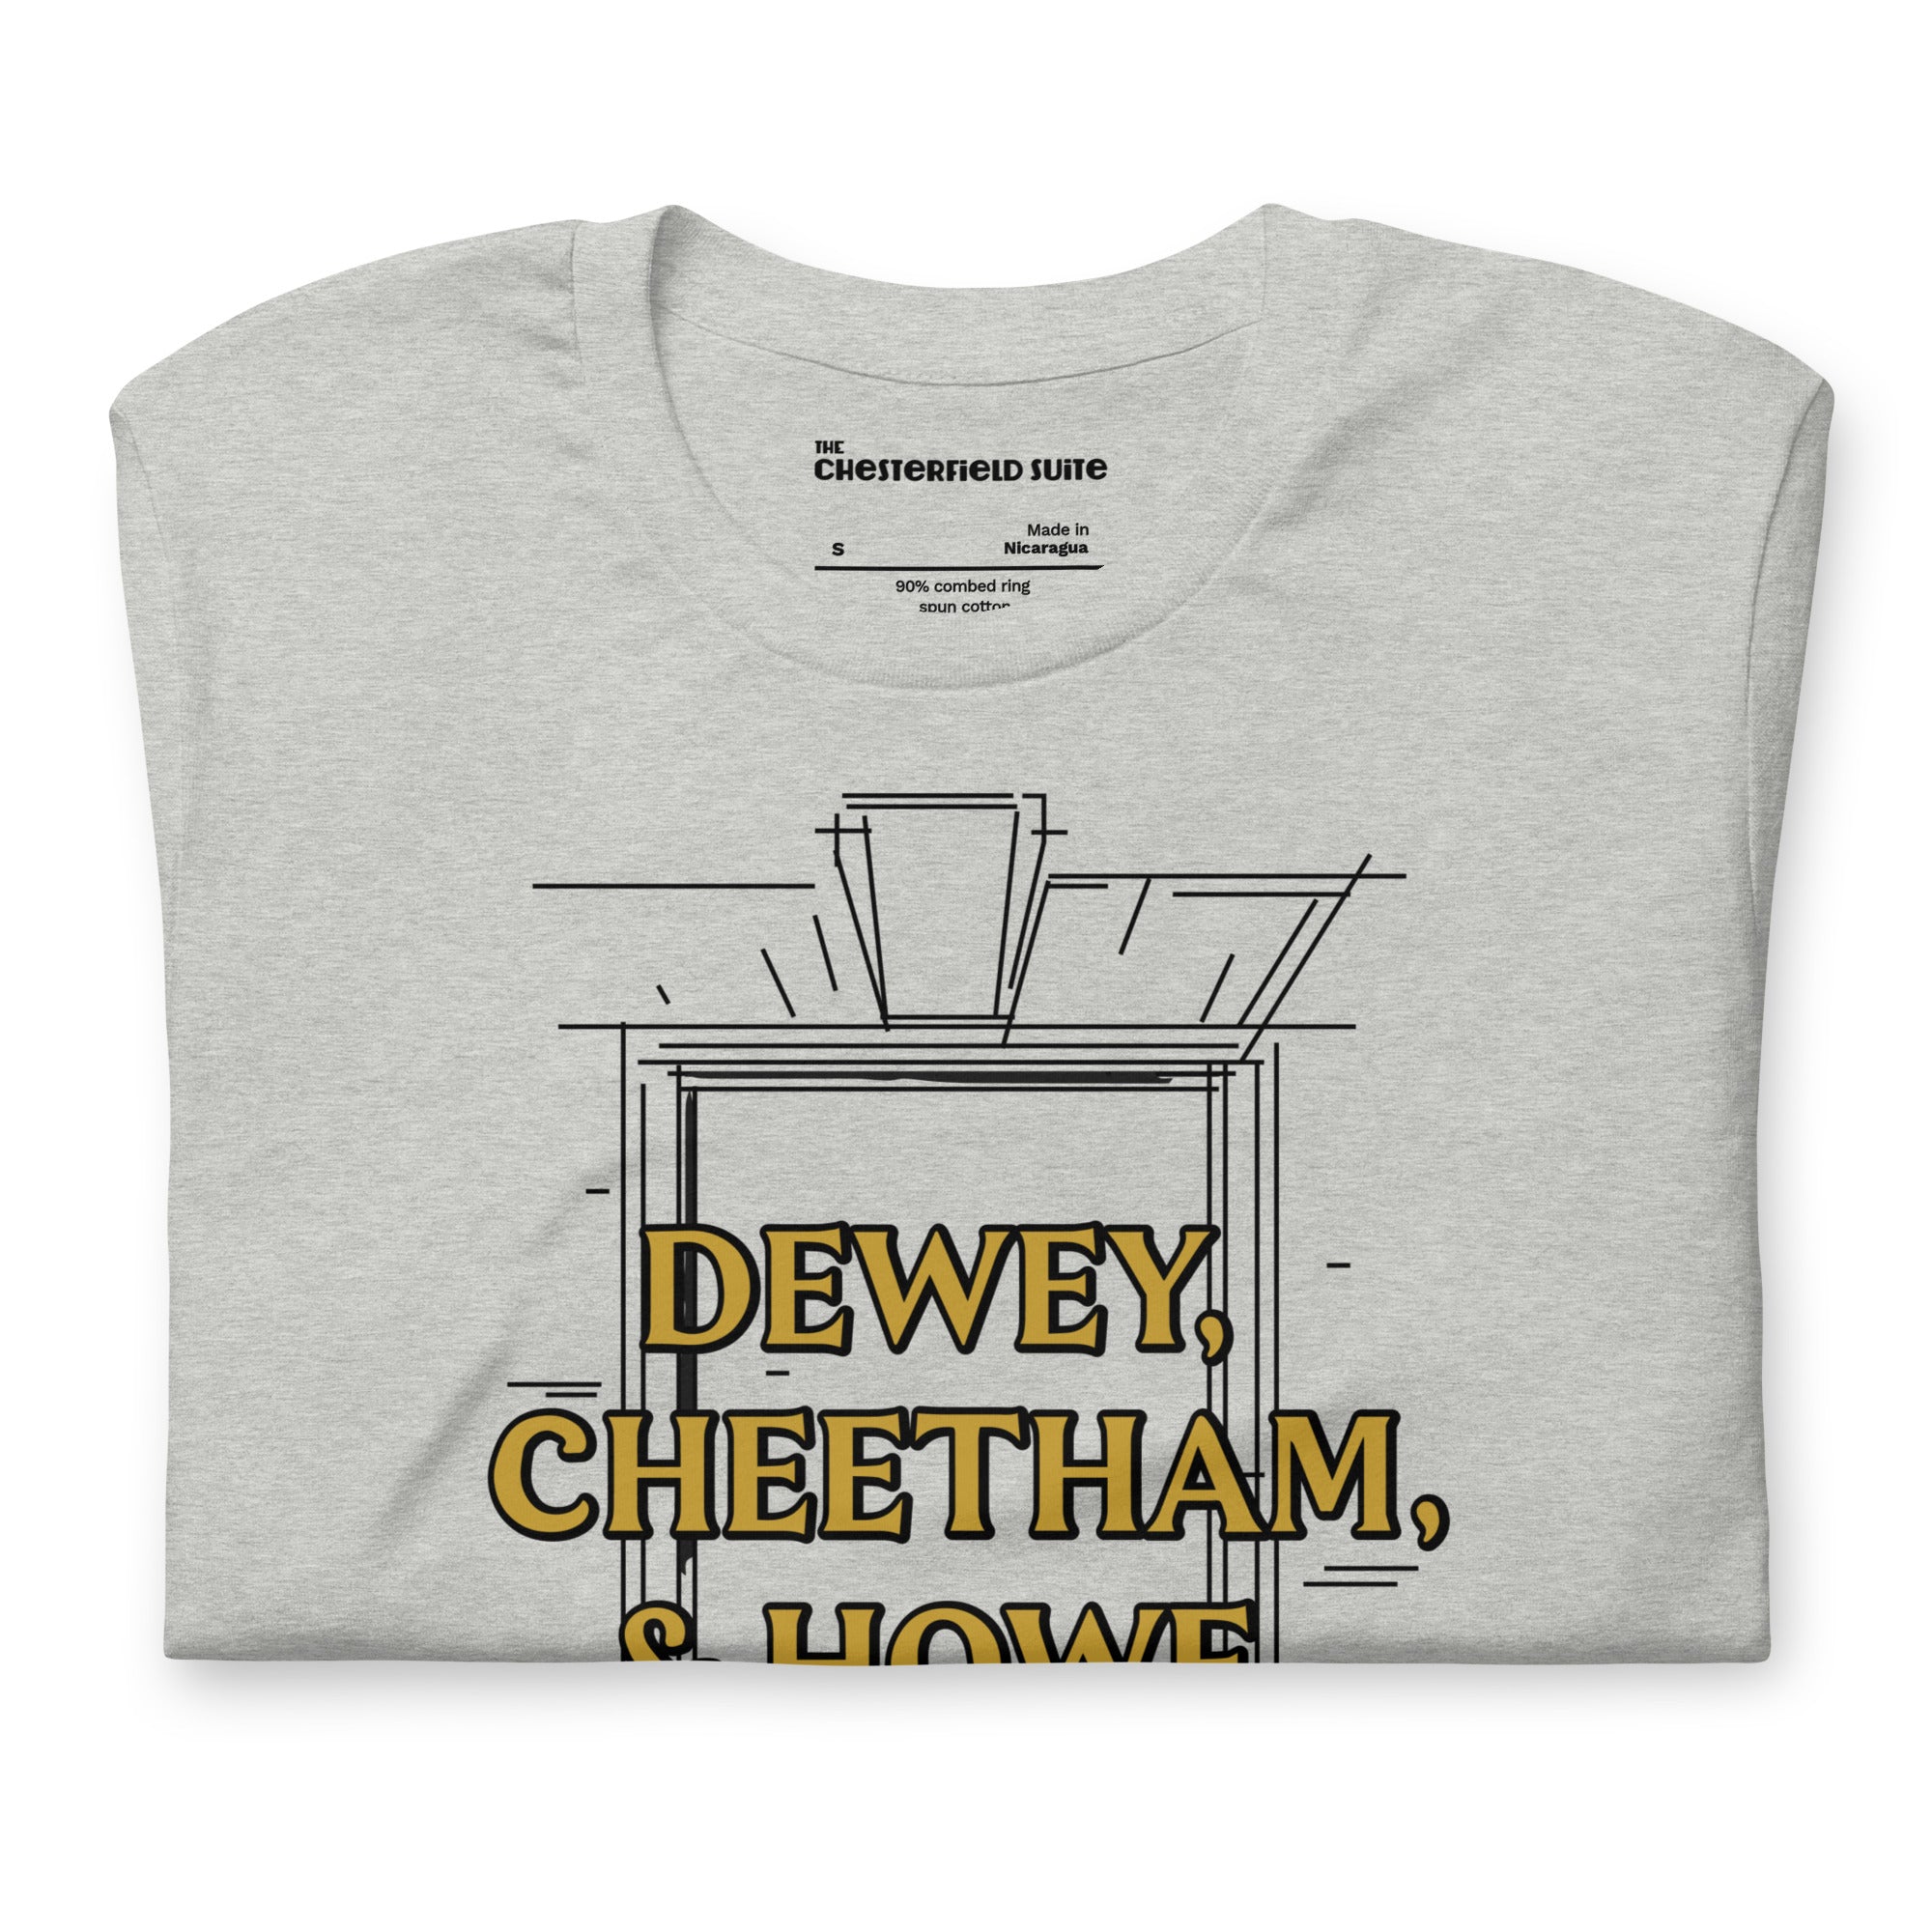 Light grey unisex t-shirt with Dewey Cheetham & Howe from Harvard square written on in gold